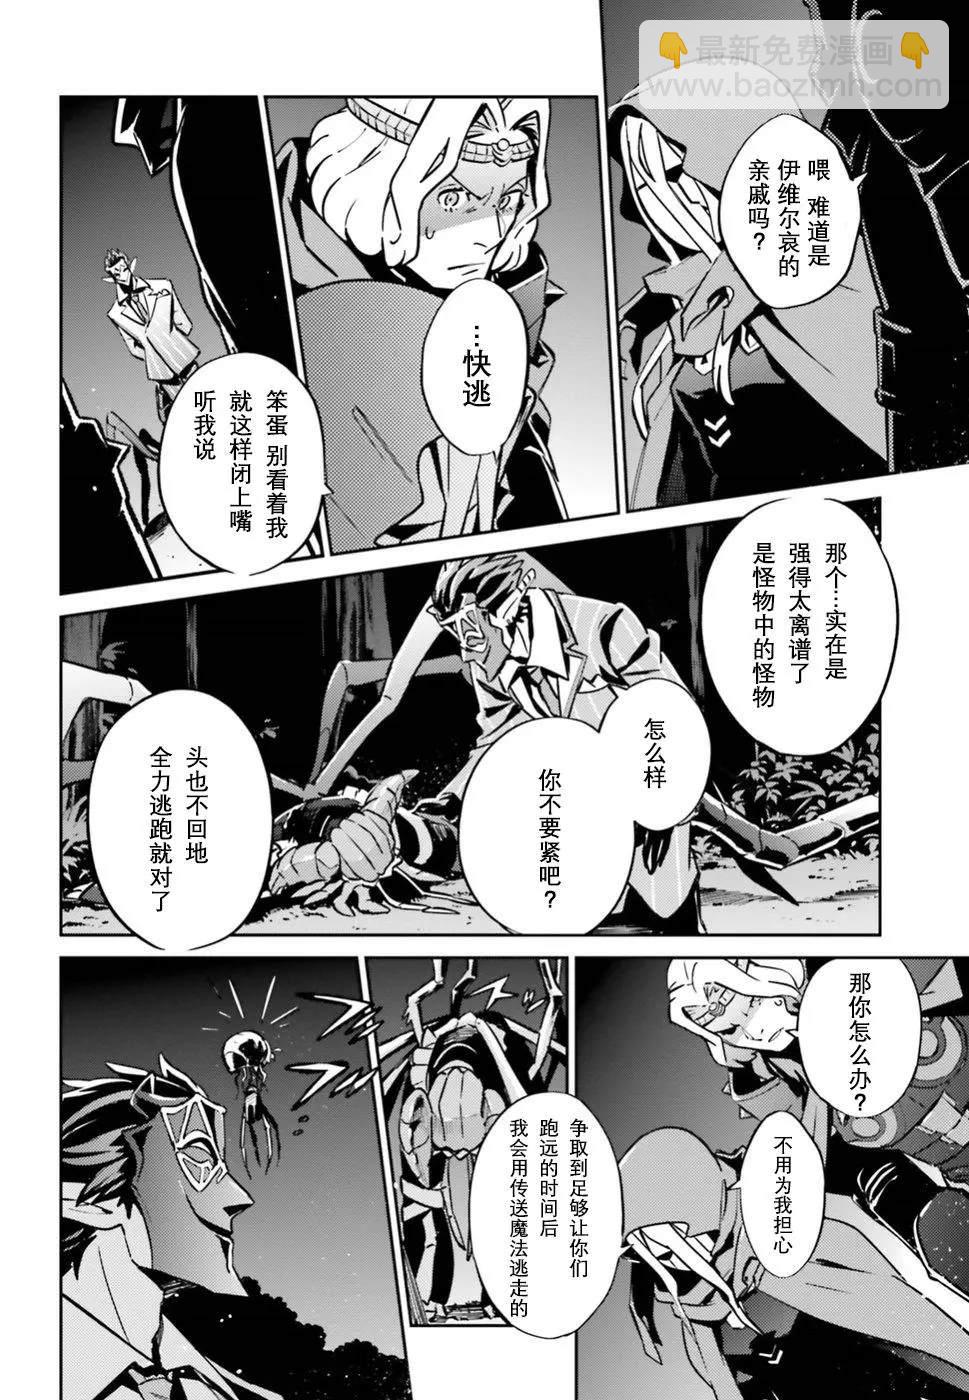 OVERLORD - 第46话 - 5